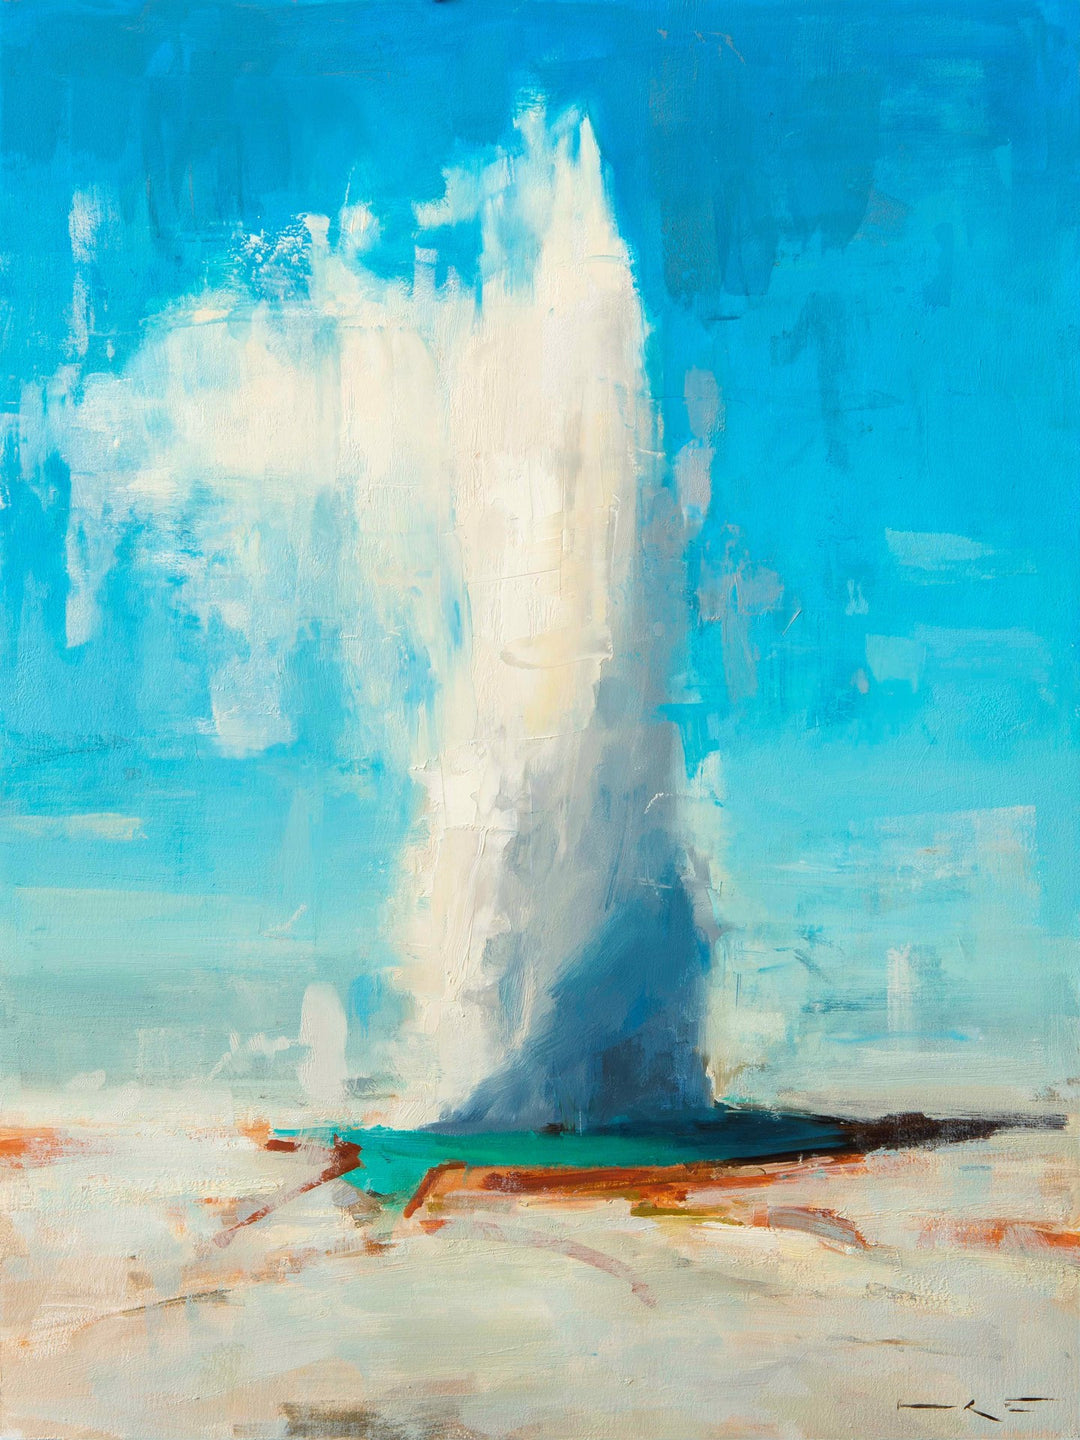 A painting of the Thorgrimur Einarsson - "Geysir" with a blue sky.